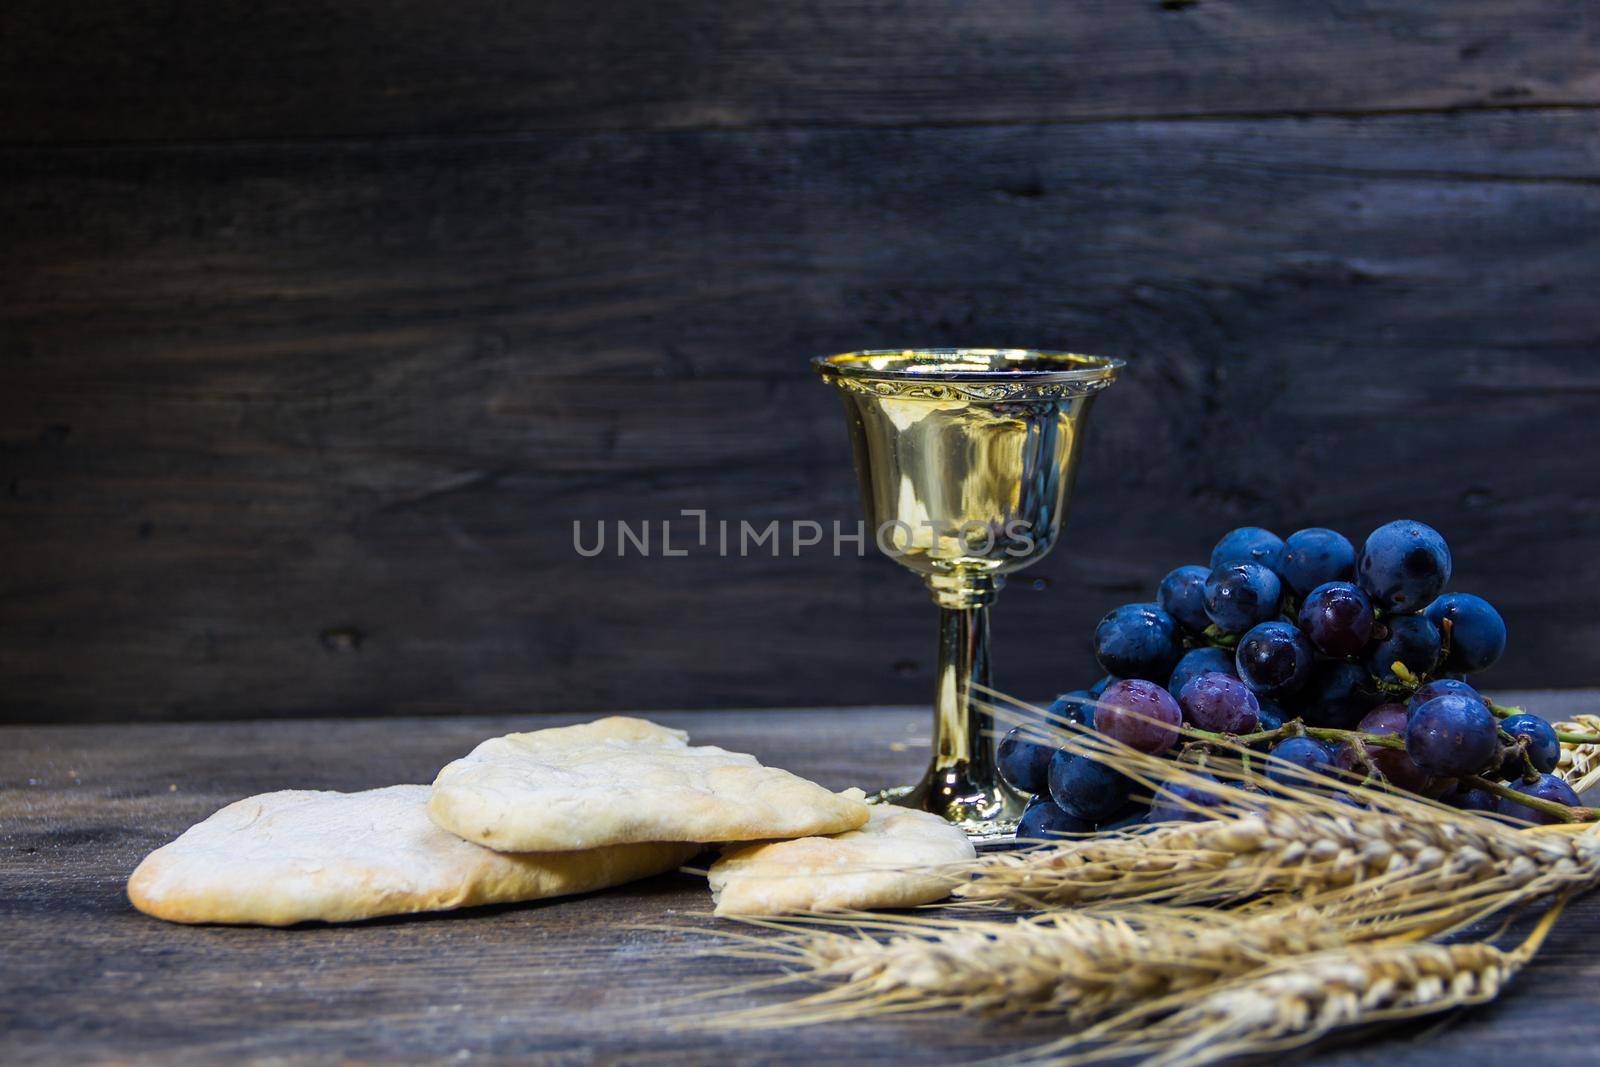 sour bread, wine, grapes and wheat symbol of Christian communion